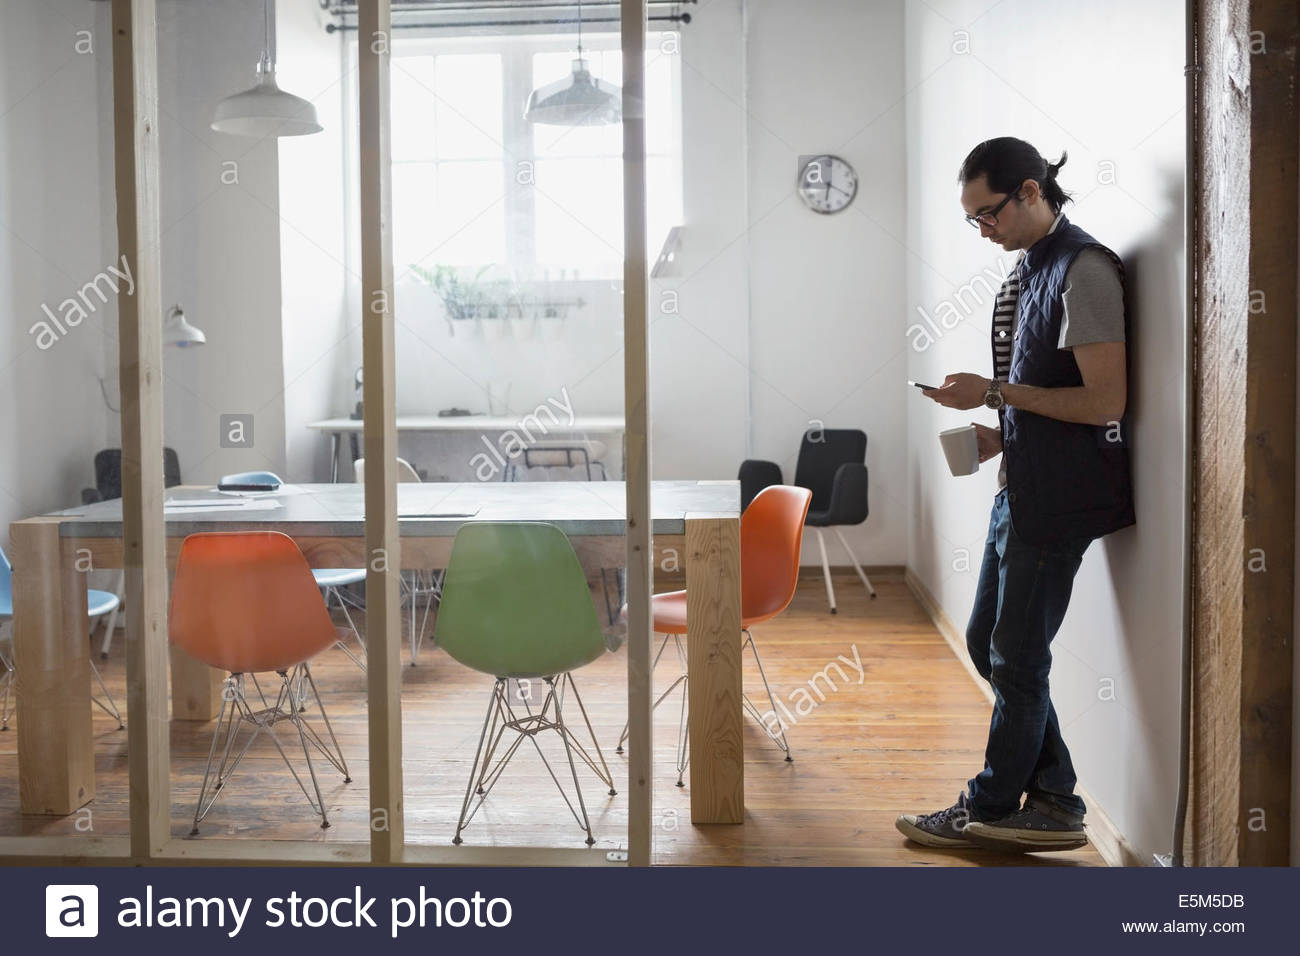 Businessman using cell phone in conference room Stock Photo